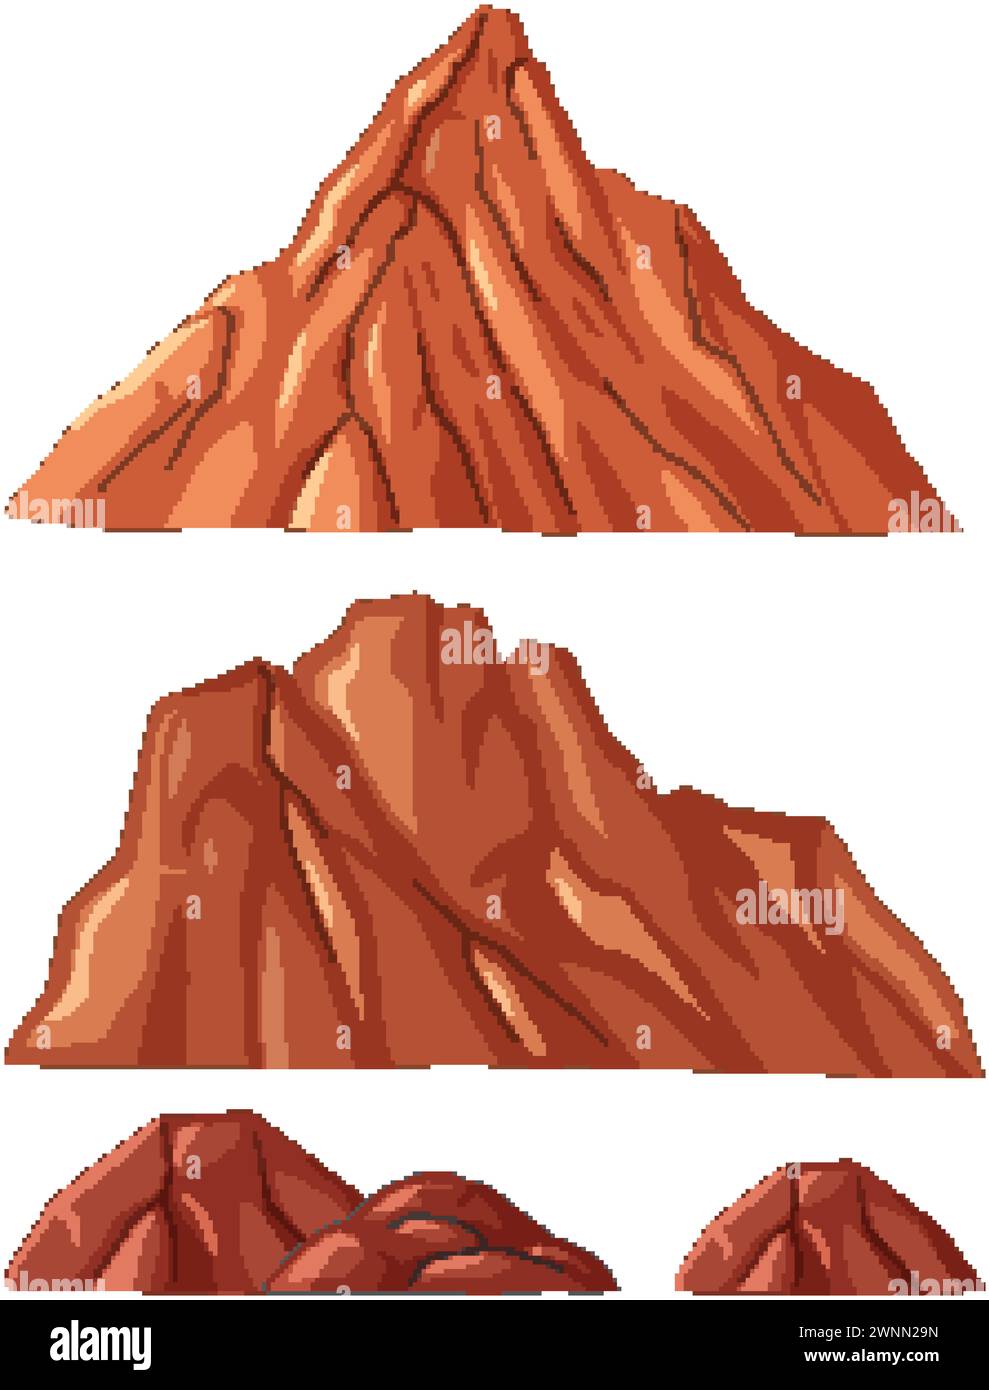 Collection of stylized vector mountain illustrations. Stock Vector